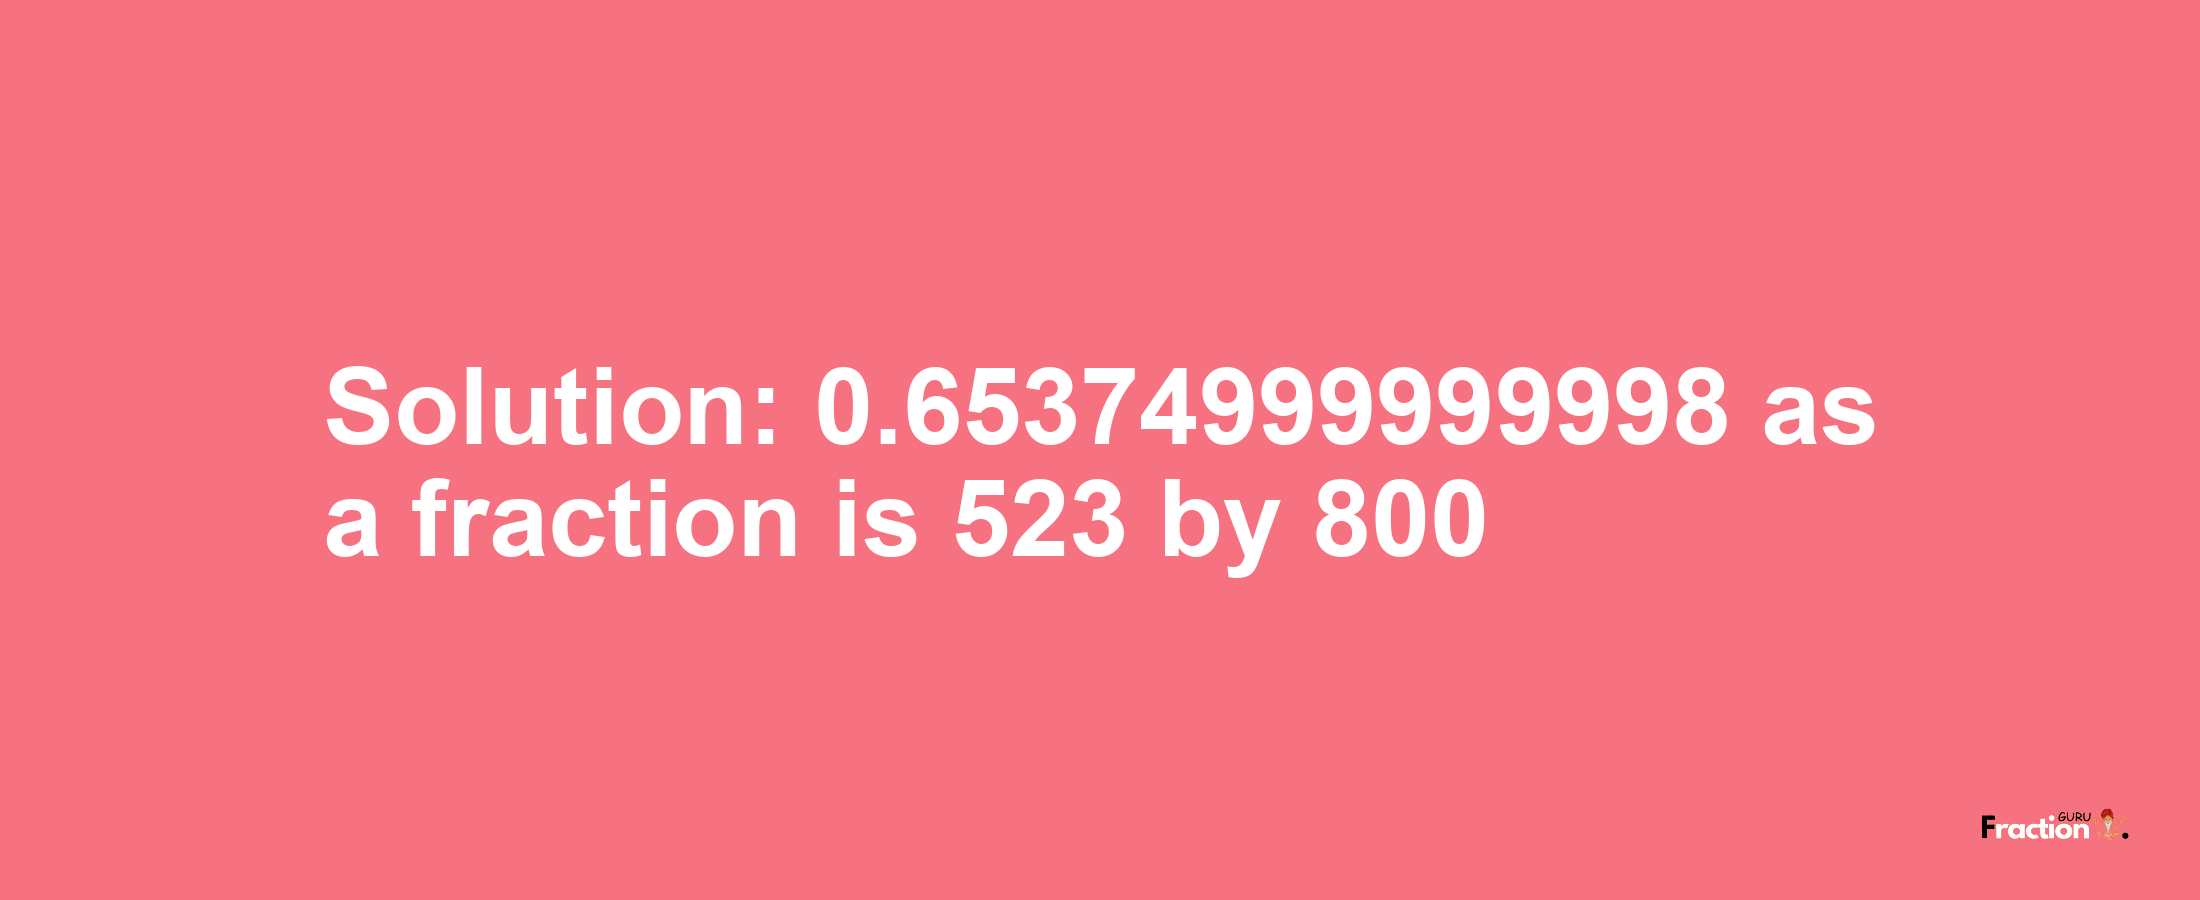 Solution:0.65374999999998 as a fraction is 523/800